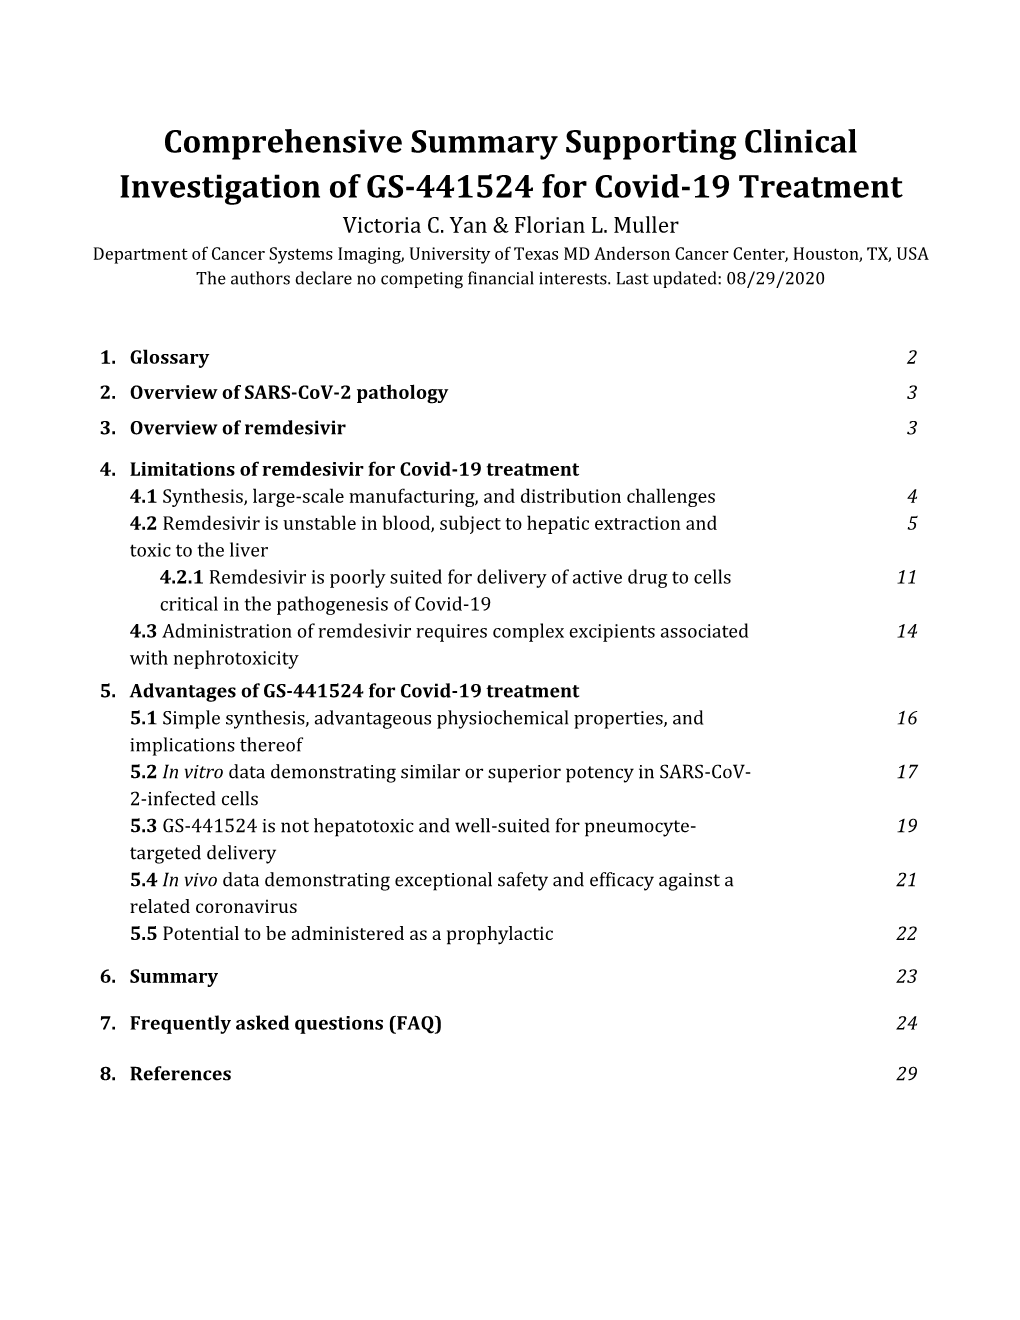 Comprehensive Summary Supporting Clinical Investigation of GS-441524 for Covid-19 Treatment Victoria C